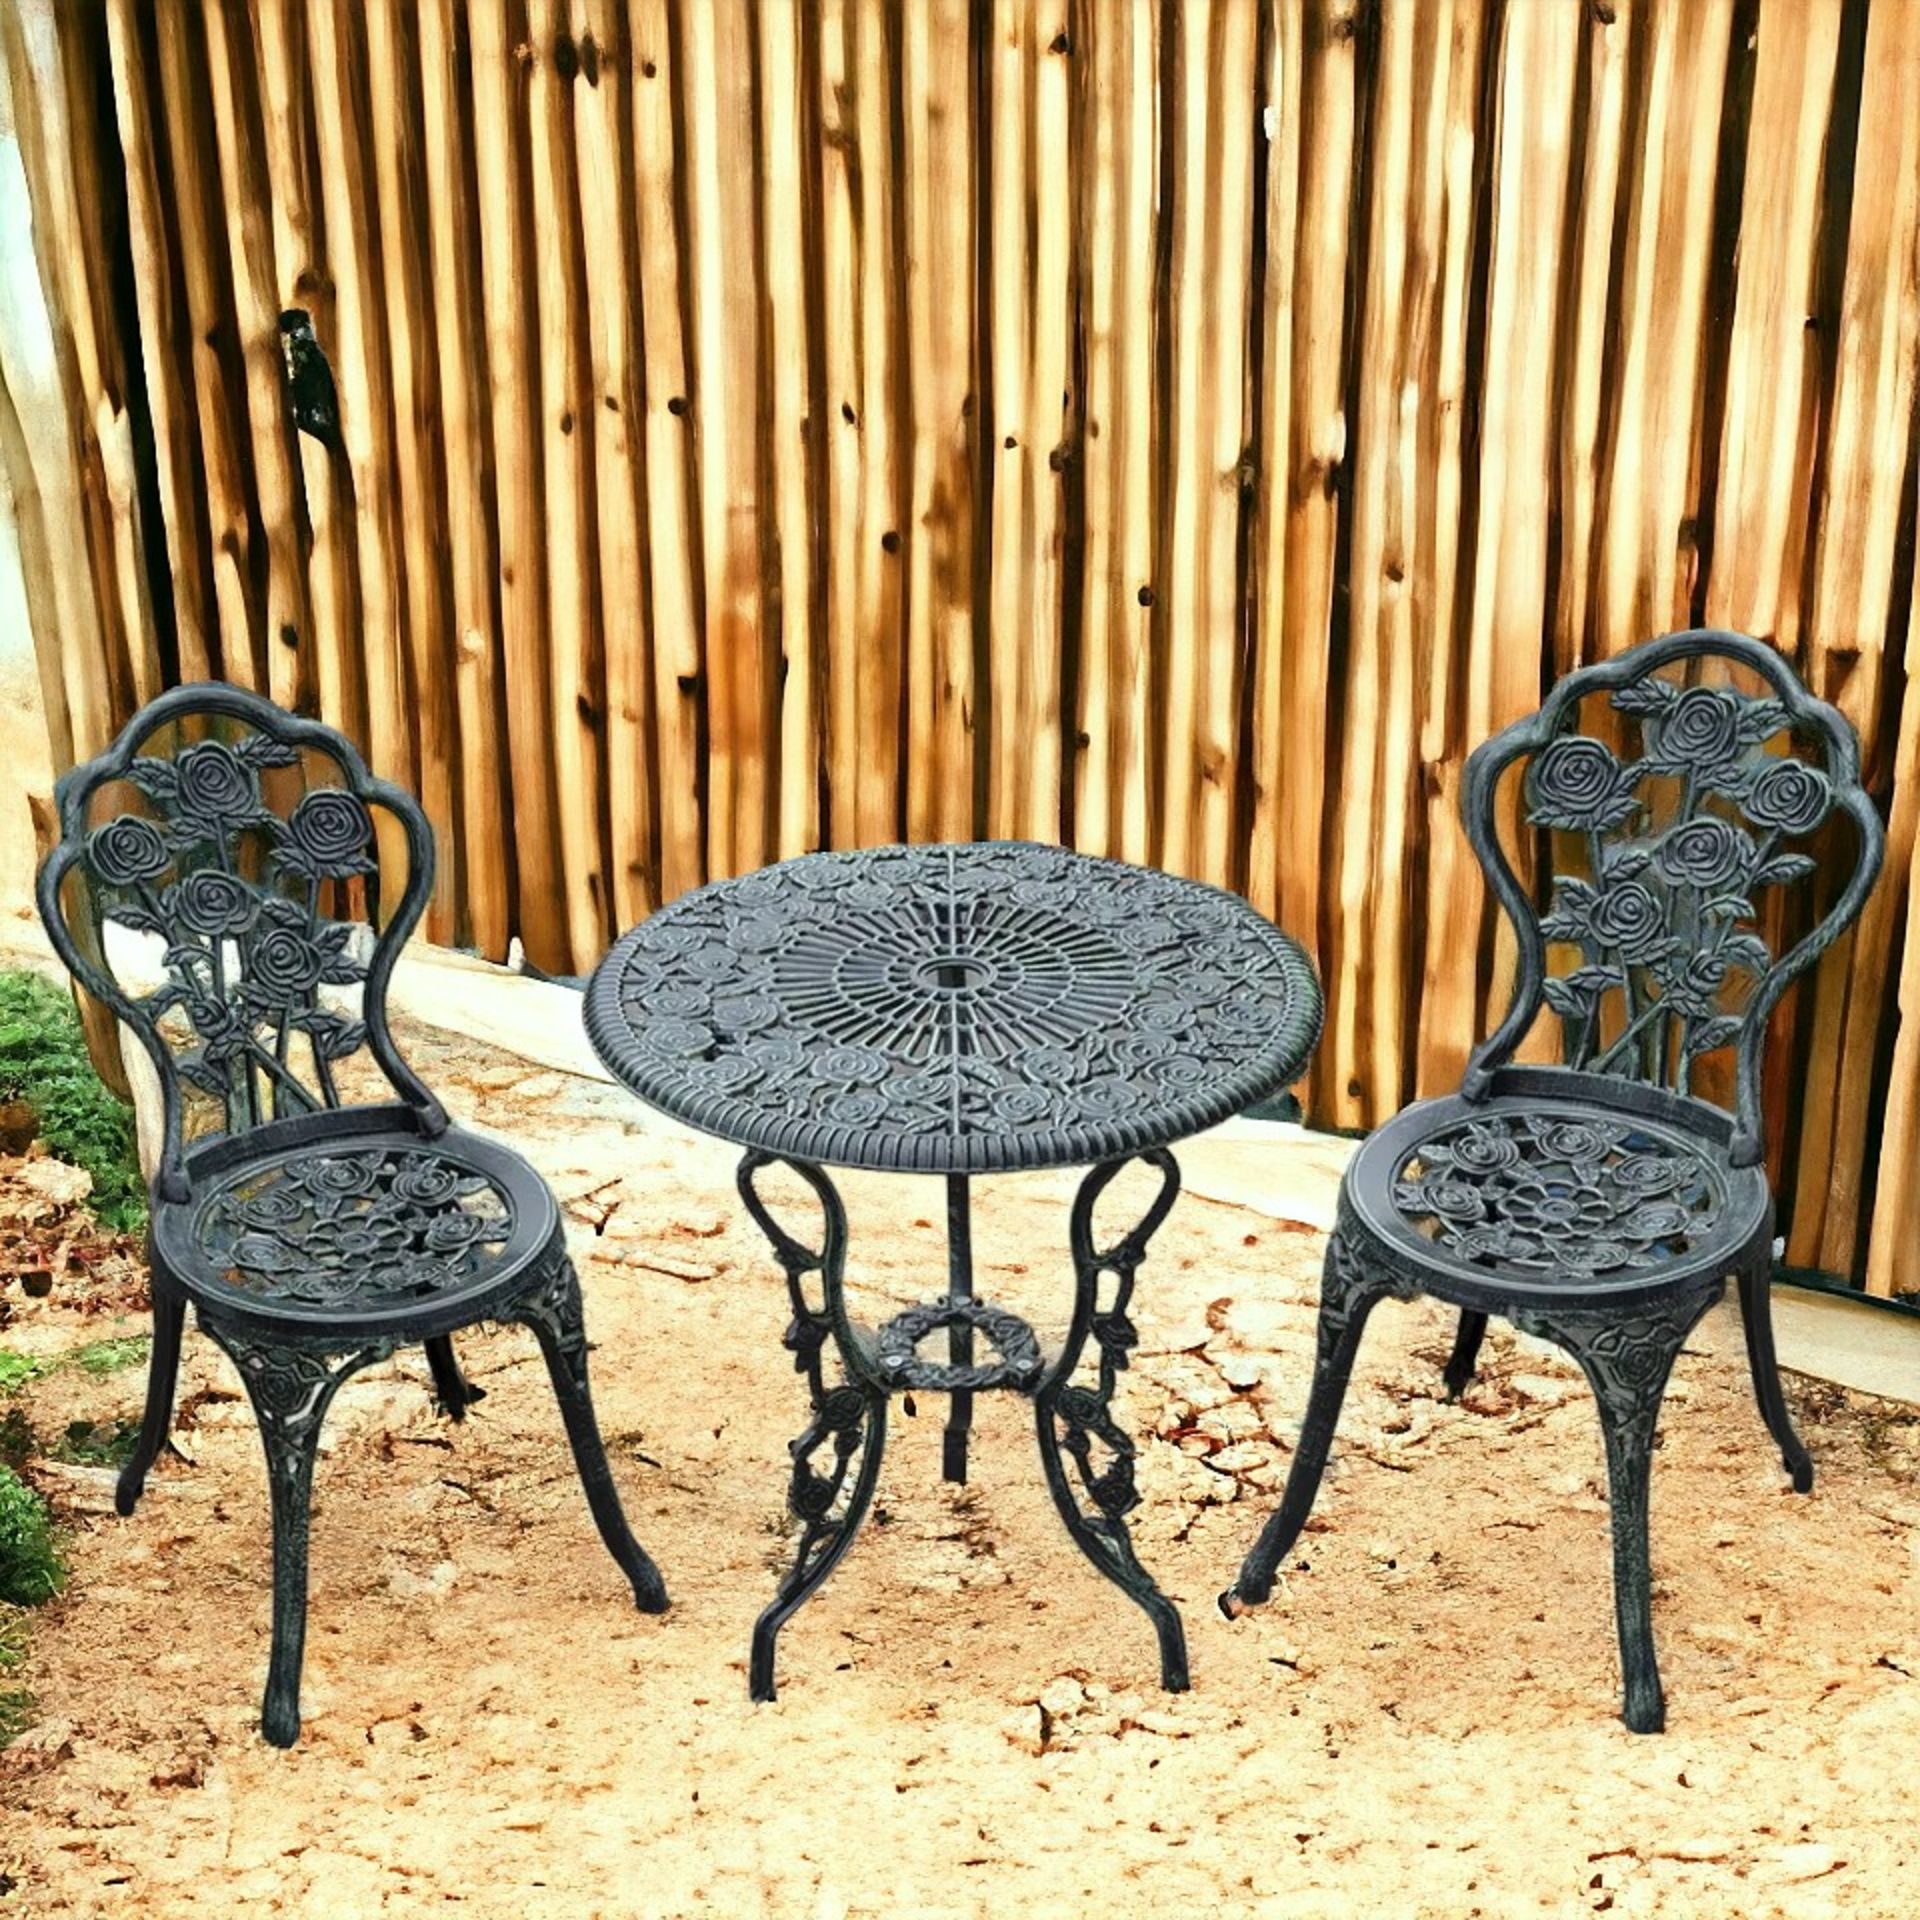 FREE DELIVERY- BRAND NEW 3 PIECES BISTRO SET FURNITURE GARDEN BALCONY TABLE 2 CHAIRS GREEN - Image 2 of 2